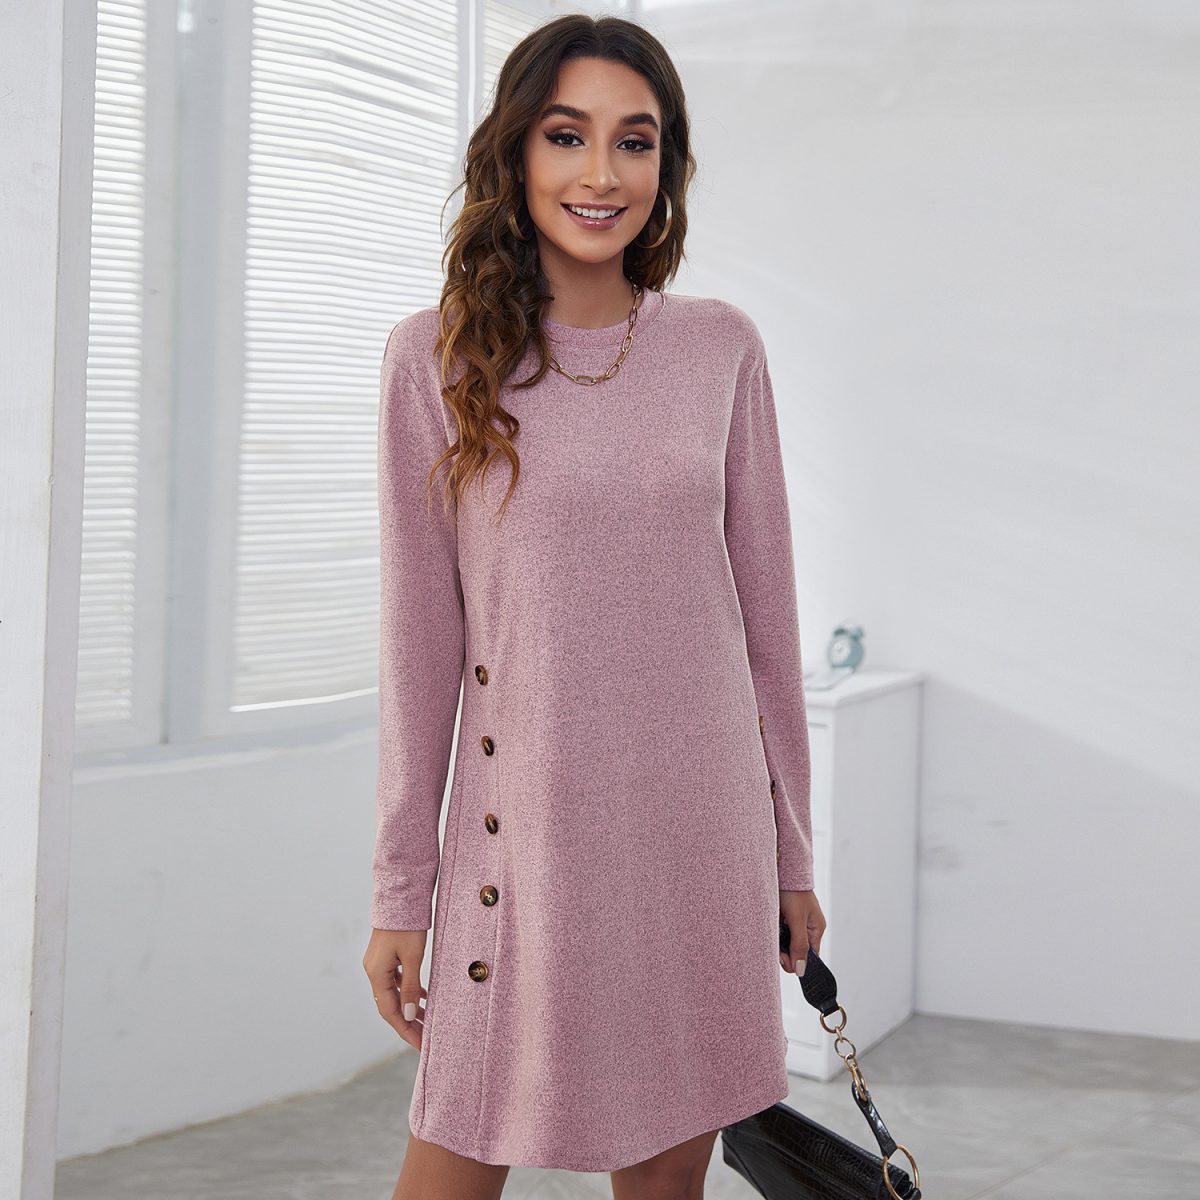 Round Neck Casual Simple Buttons Long Sleeve Dress in Dresses